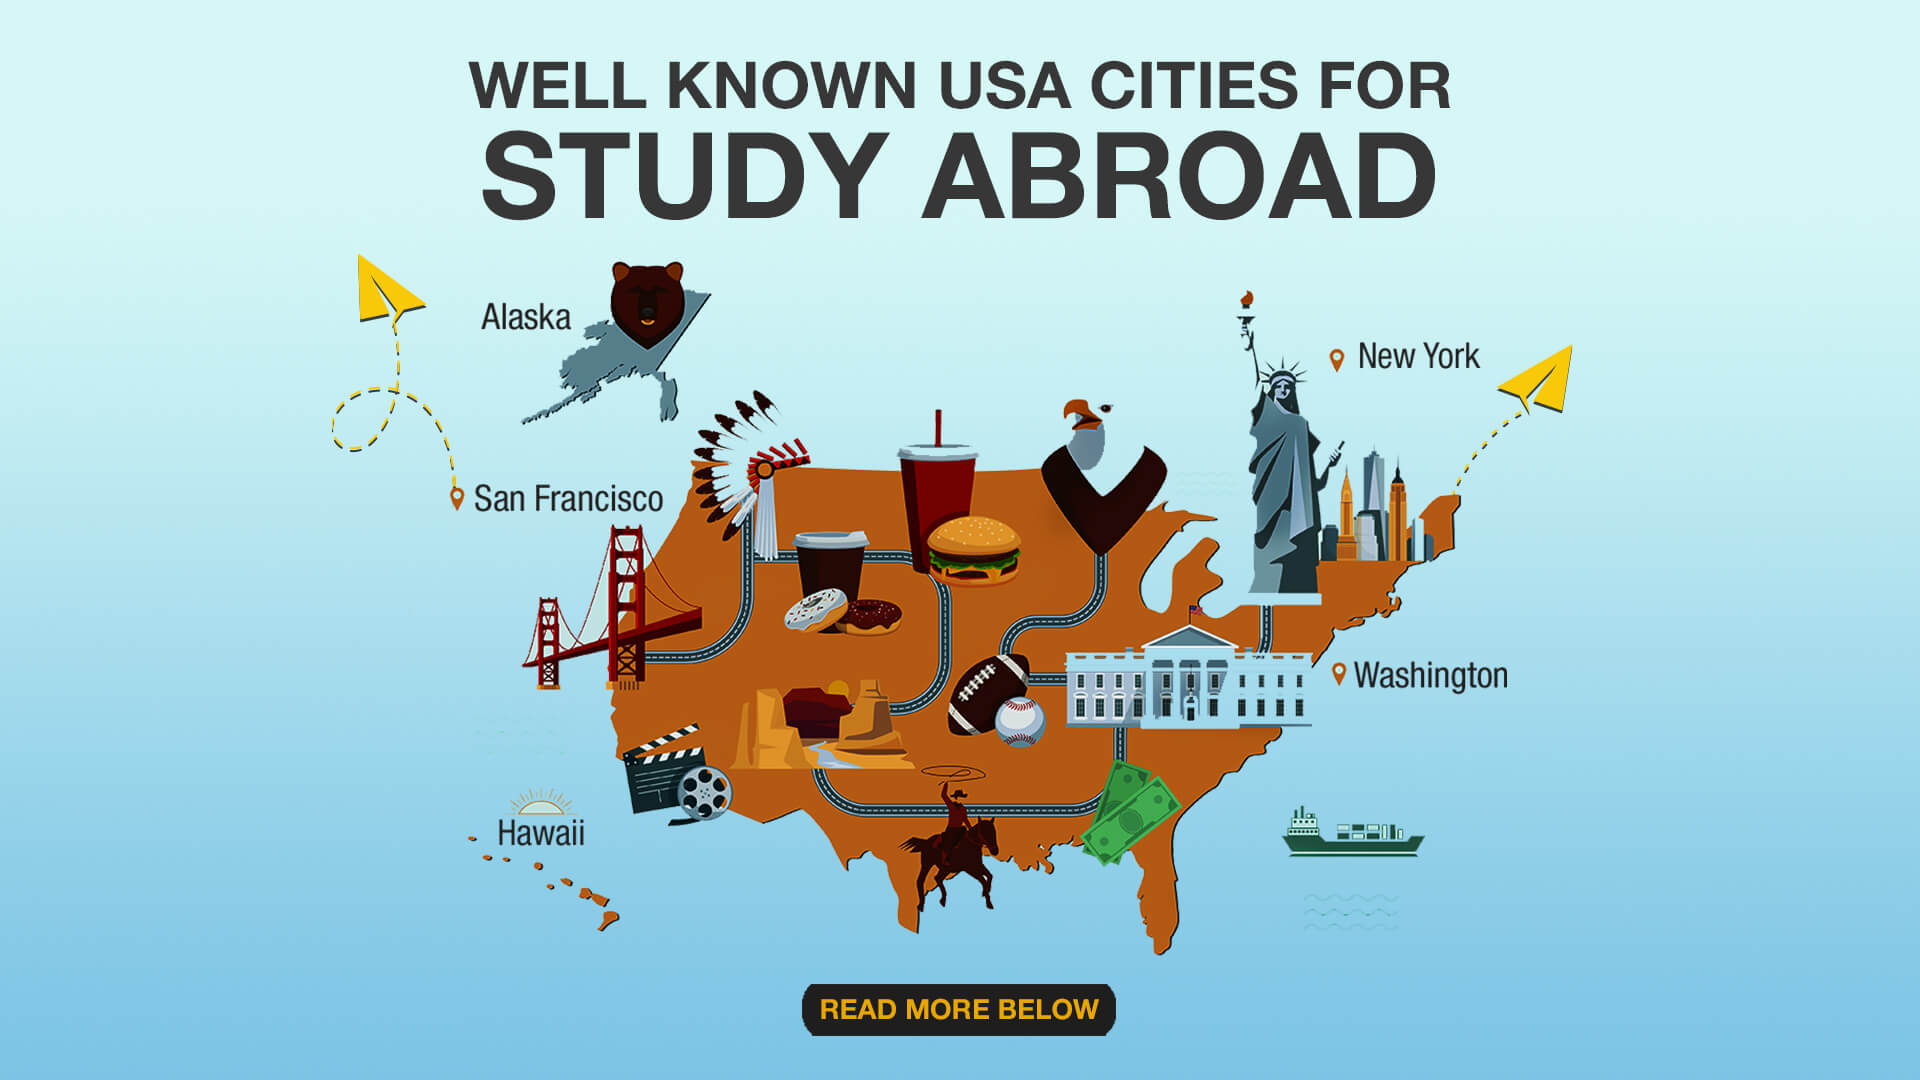 Well known USA cities for Study Abroad